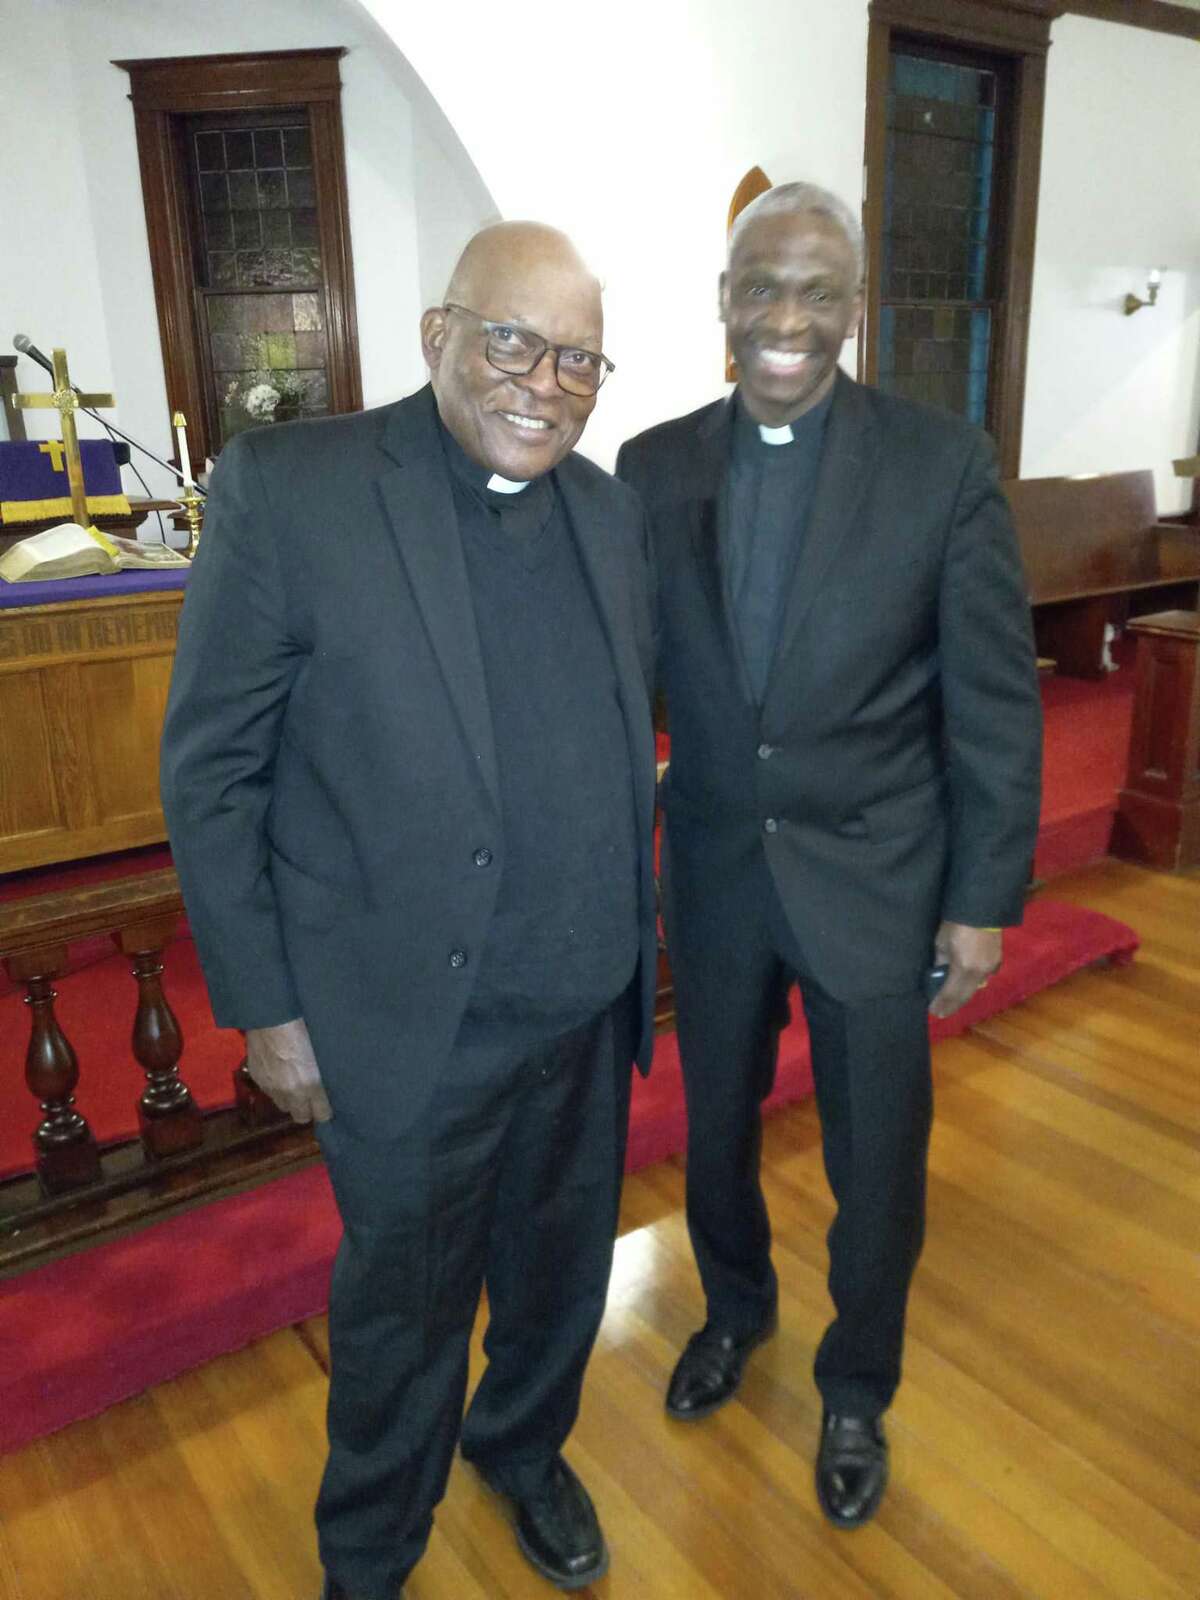 Angaza Mwando recently became an ordained member of the Workman Memorial AME Zion church in Torrington. He is pictured with the Rev. Kevin Johnson, pastor of Workman Memorial.